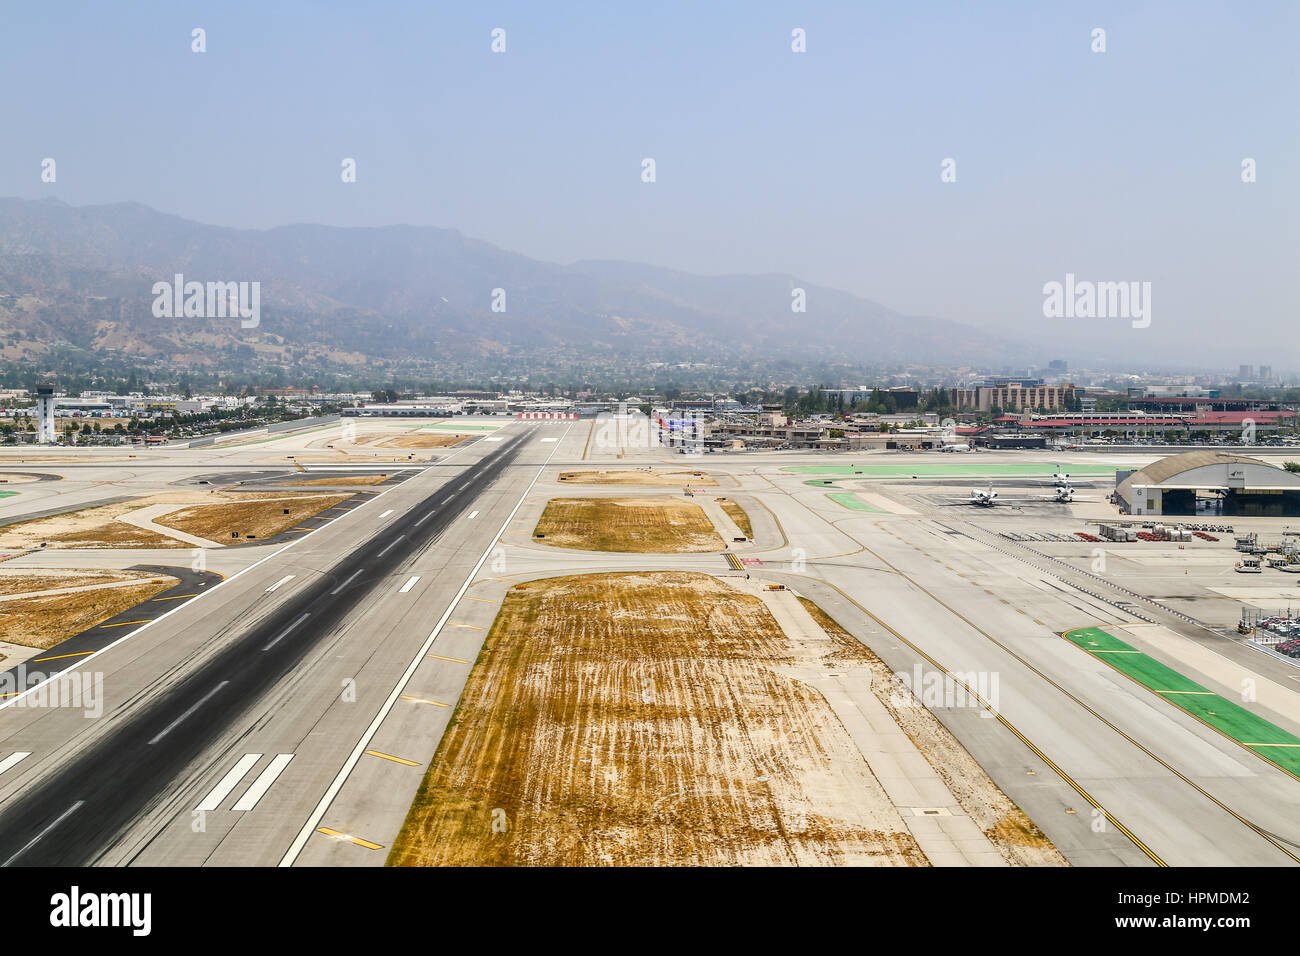 Burbank, USA - May 27, 2015: Aerial view of the airport with runways, a hangar and parked airplanes. Stock Photo